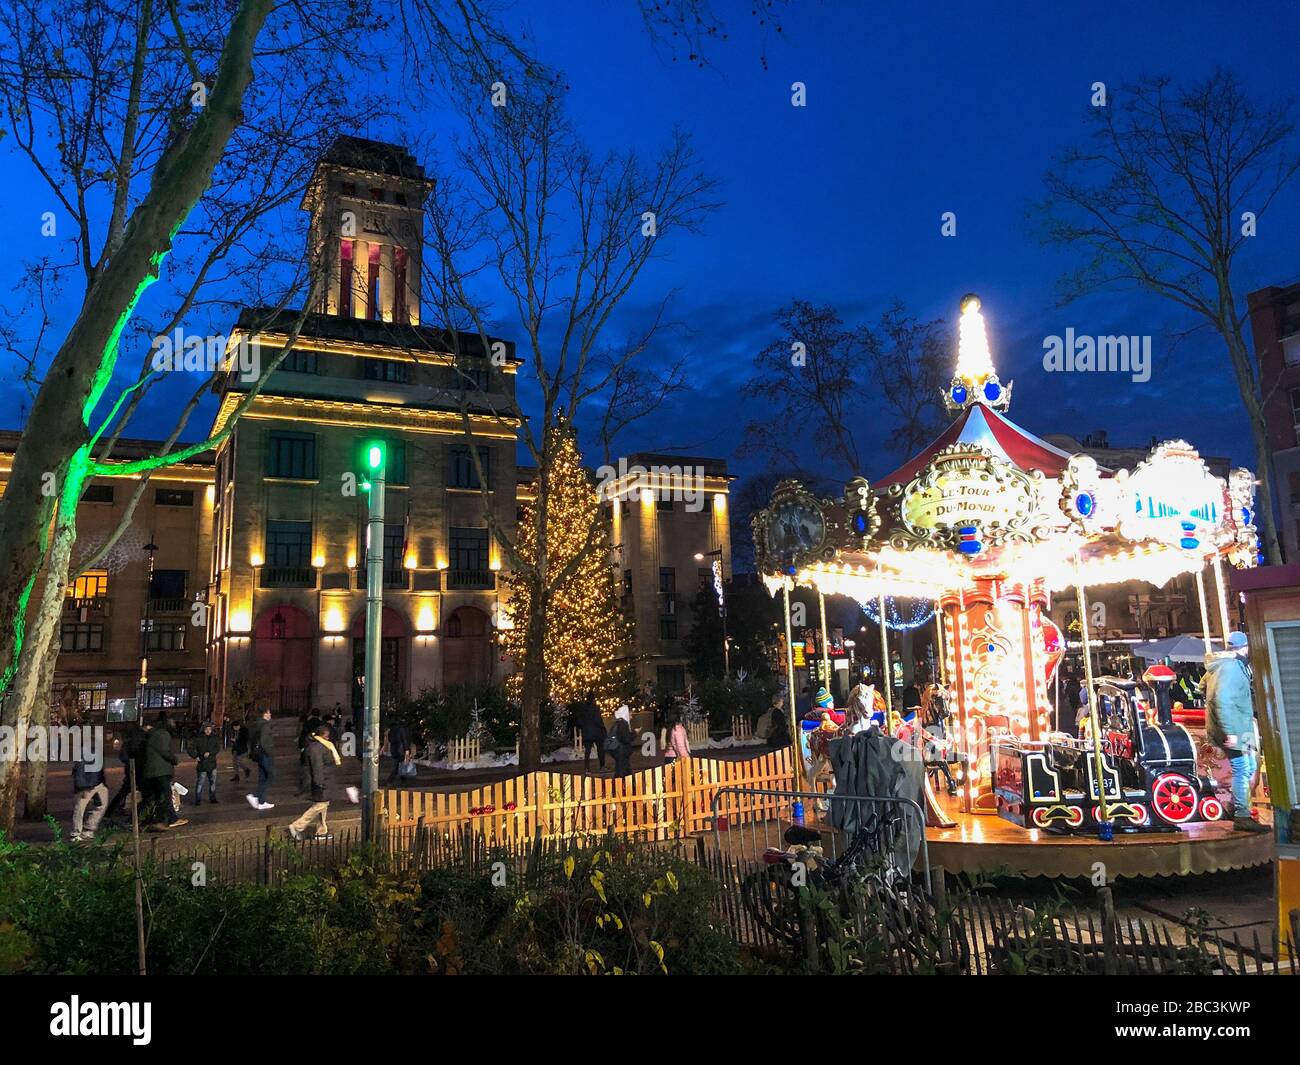 Montreuil, France, City Hall Building Lit up at Night with Merry-go-Round, Roundabout RIde on Town Square, suburban neighborhood Stock Photo